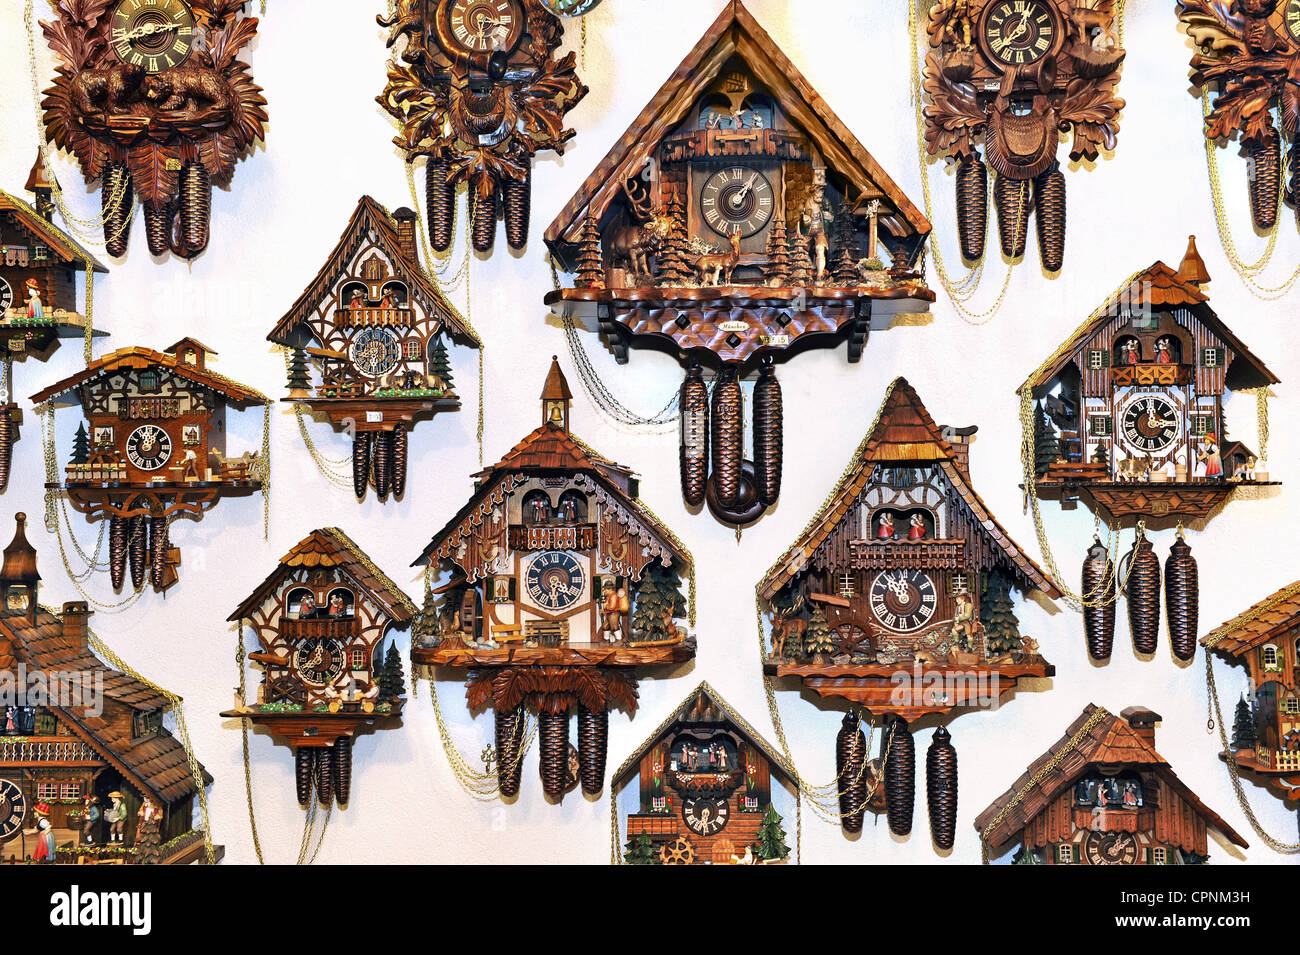 clock, cuckoo clock, Black Forest cuckoo clocks, hanging on the wall, selection in a Munich souvenir shop, Germany, Additional-Rights-Clearance-Info-Not-Available Stock Photo